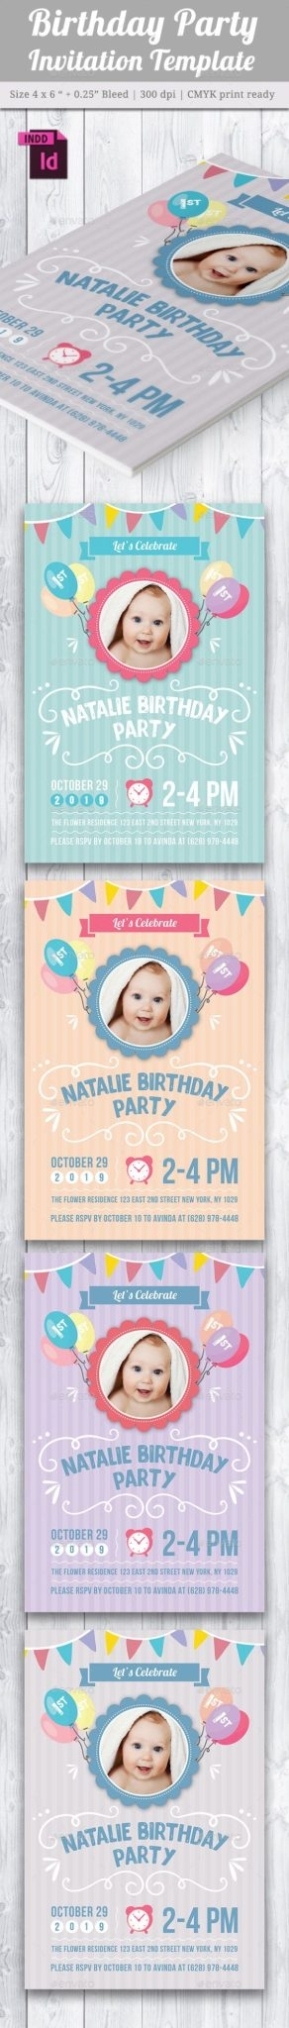 Indesign Birthday Card Template Throughout Indesign Birthday Card Throughout Birthday Card Template Indesign